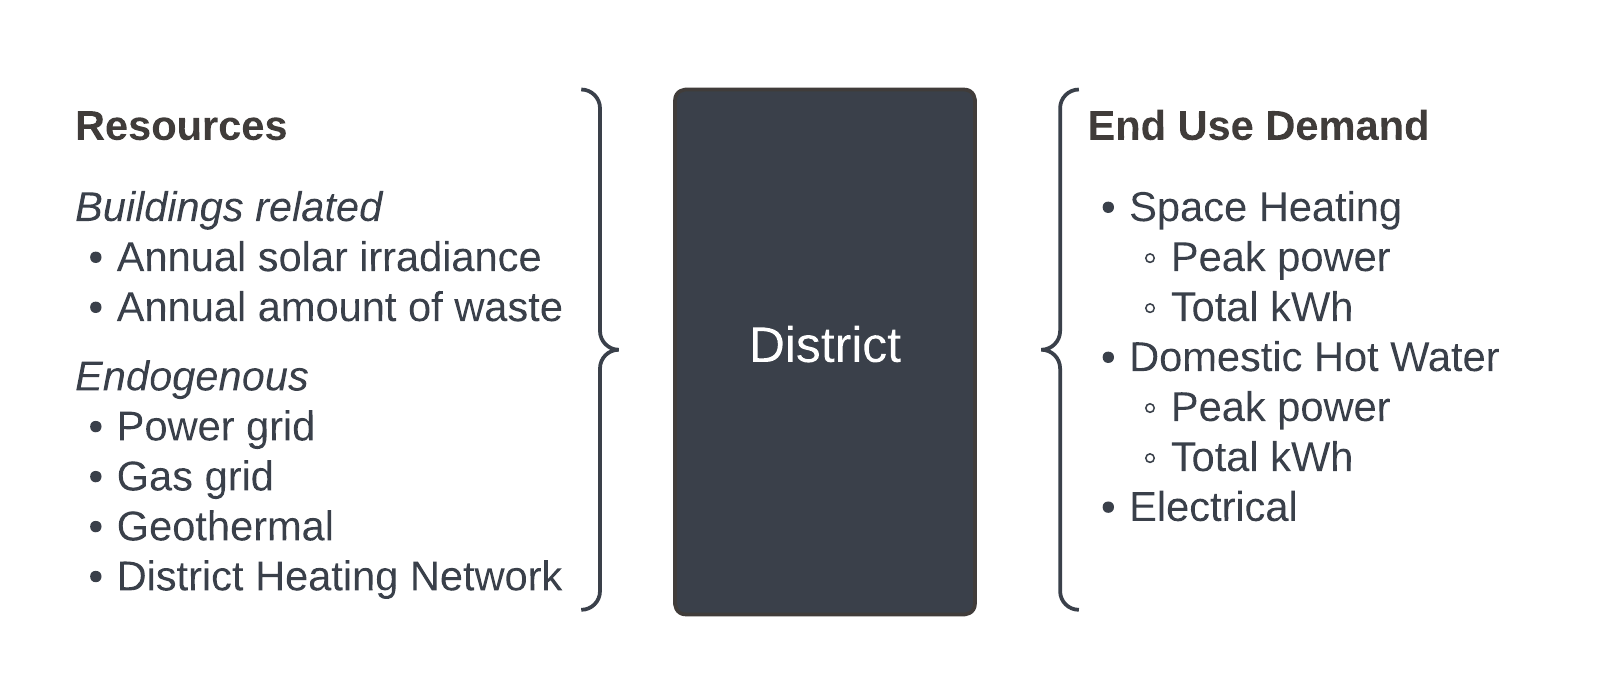 Summary of the energy-wise characteristics of a district